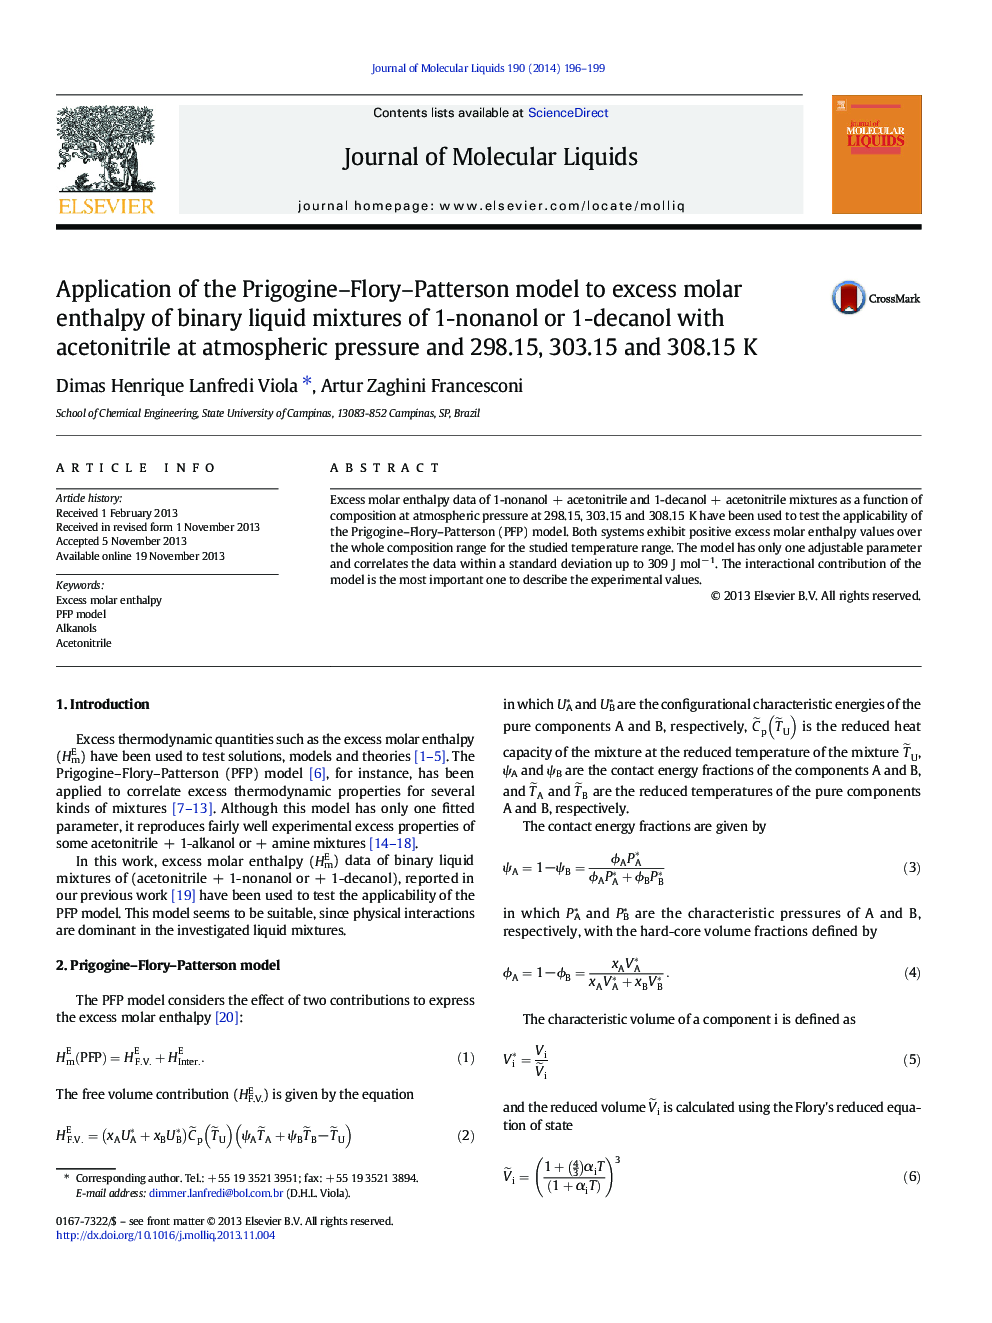 Application of the Prigogine-Flory-Patterson model to excess molar enthalpy of binary liquid mixtures of 1-nonanol or 1-decanol with acetonitrile at atmospheric pressure and 298.15, 303.15 and 308.15Â K